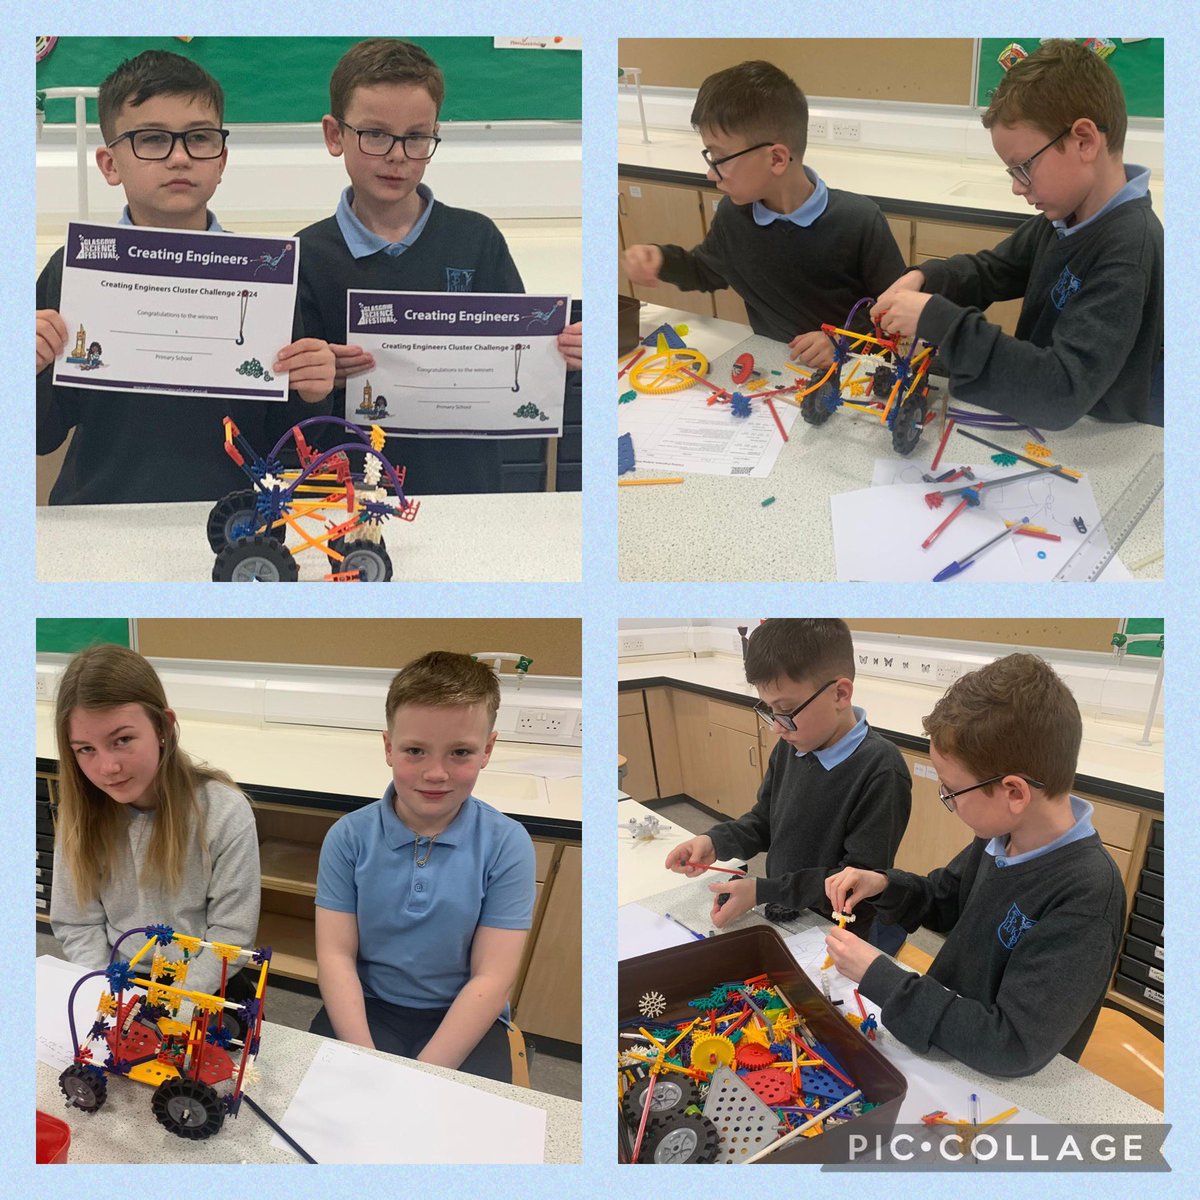 A massive well done to HMacL and EI who came 1st and CS and MMcG who came 3rd in the cluster Creating Engineers event held @StMatthewsAc today. Good luck to H and E who are through to the final! @NAC_STEM